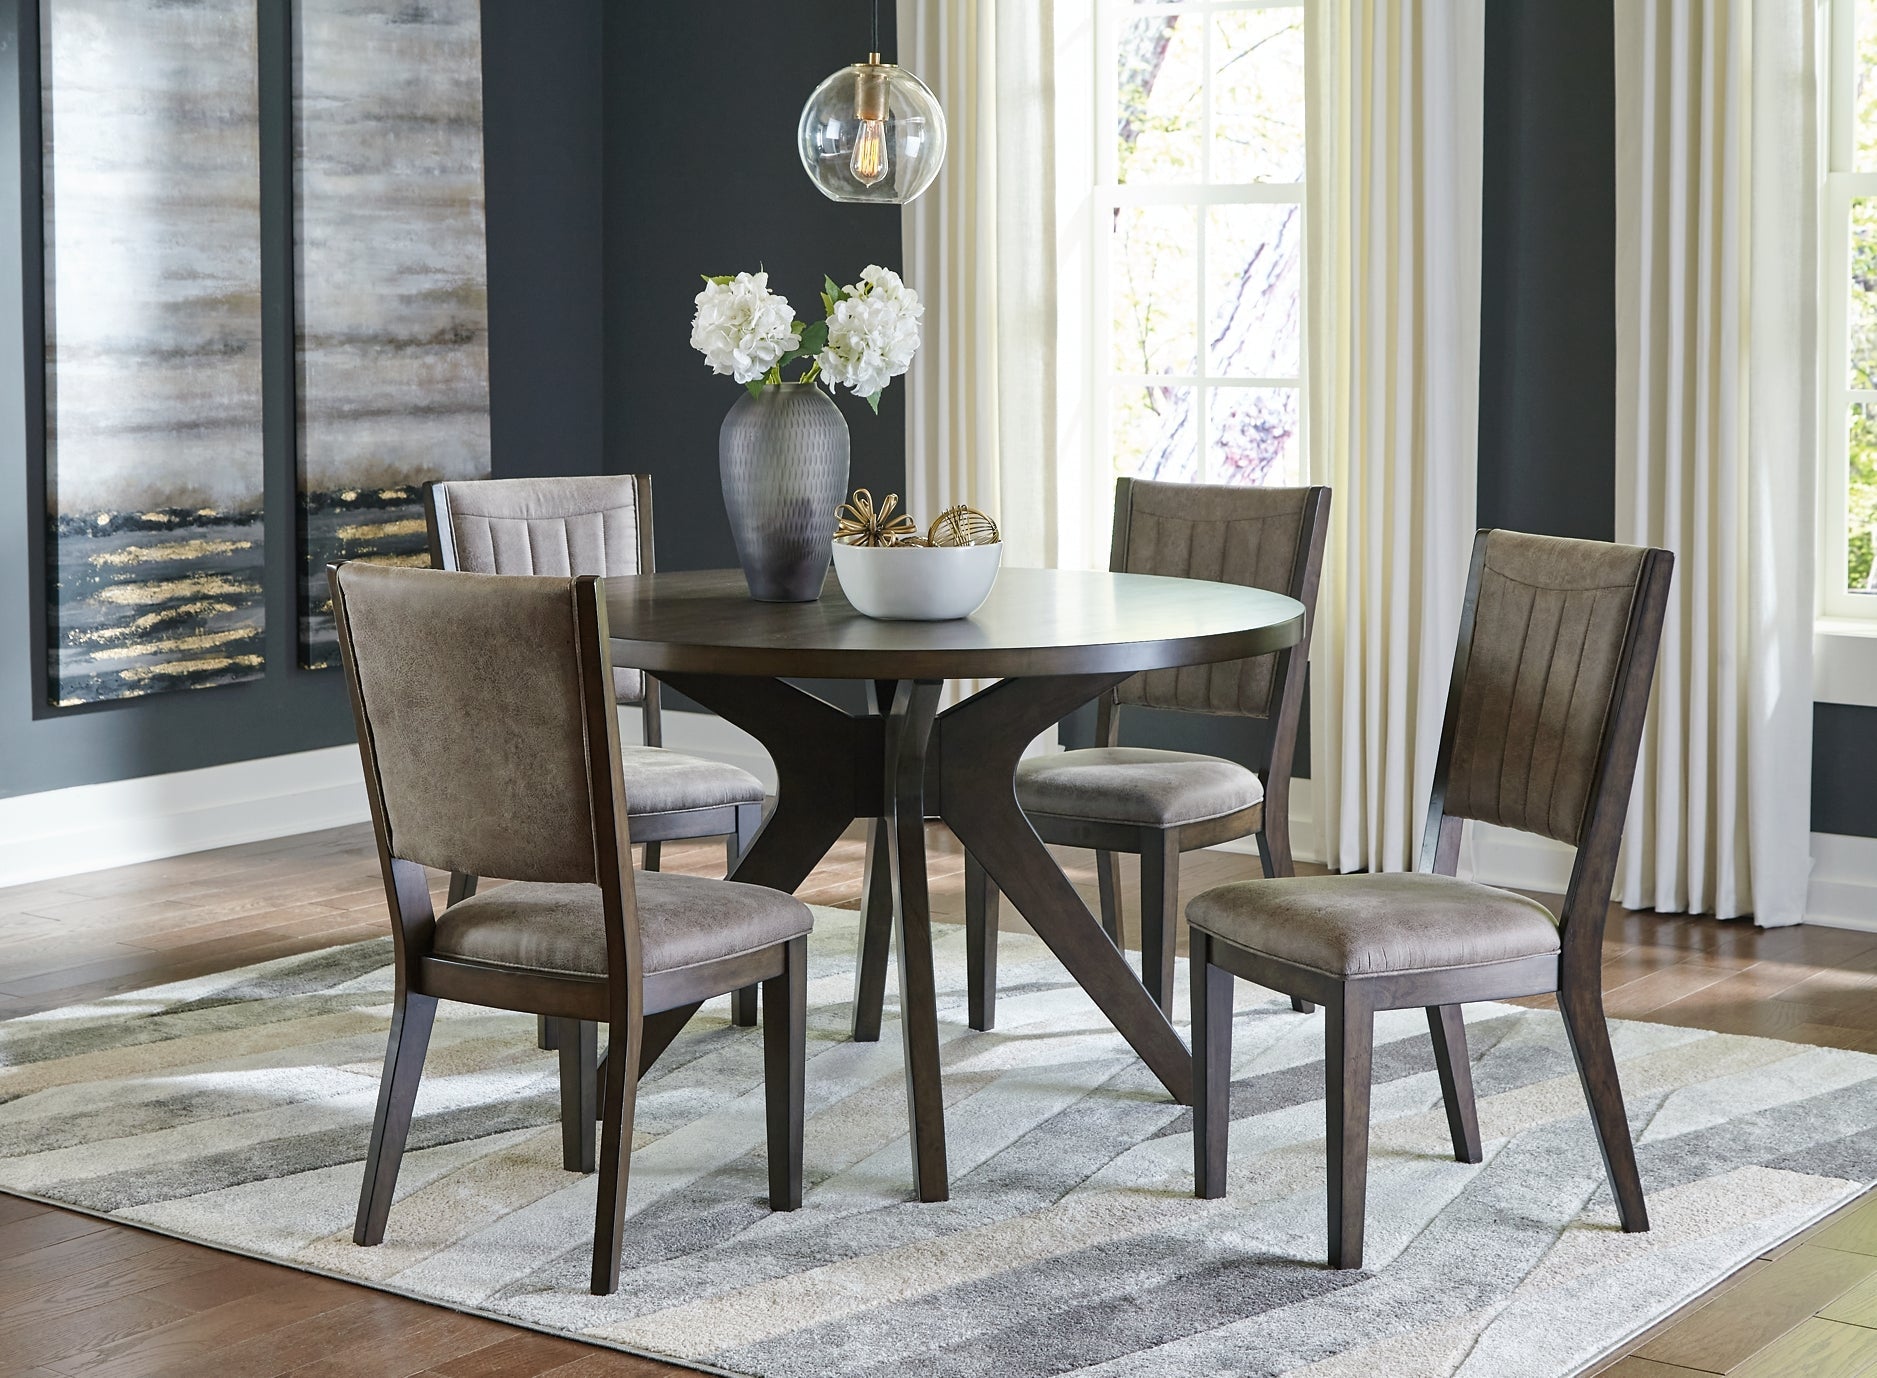 Wittland Dining Table and 4 Chairs at Walker Mattress and Furniture Locations in Cedar Park and Belton TX.